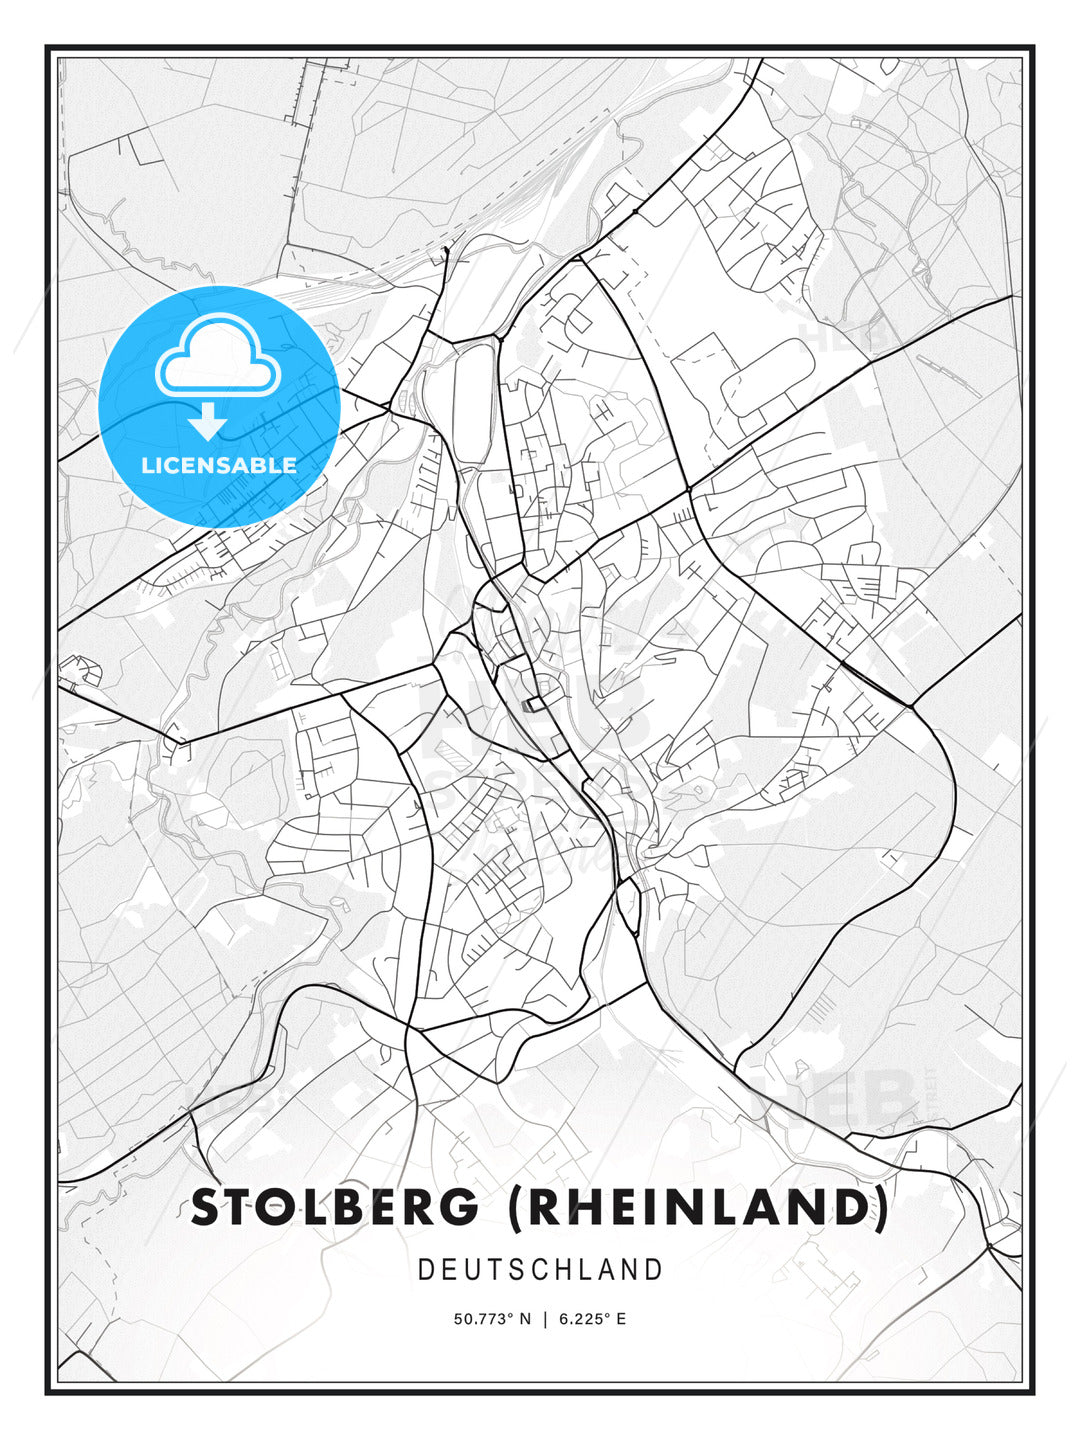 Stolberg (Rheinland), Germany, Modern Print Template in Various Formats - HEBSTREITS Sketches